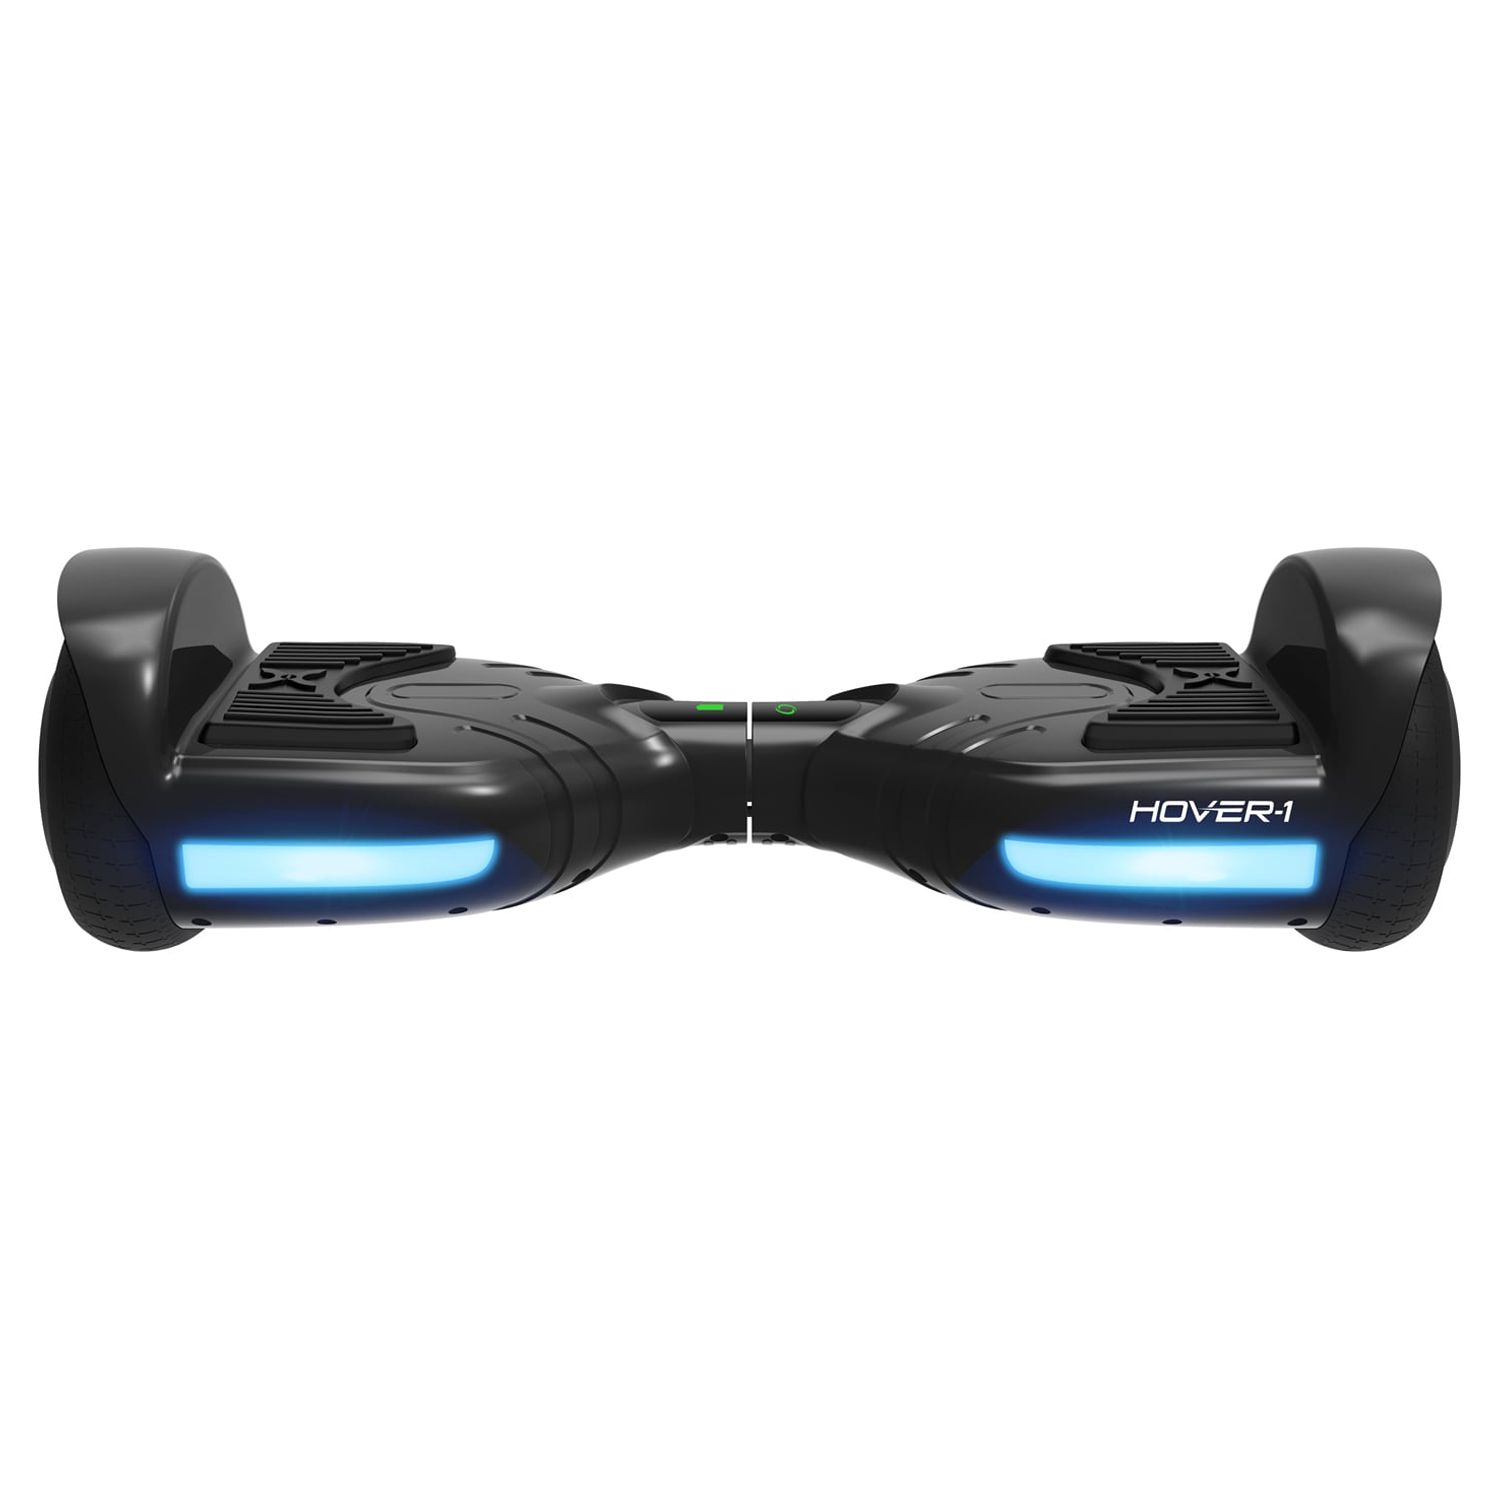 Hover-1 Blast Hoverboard, LED Lights, 160 lbs Max Weight, 7 mph Max Speed, Black - image 4 of 5